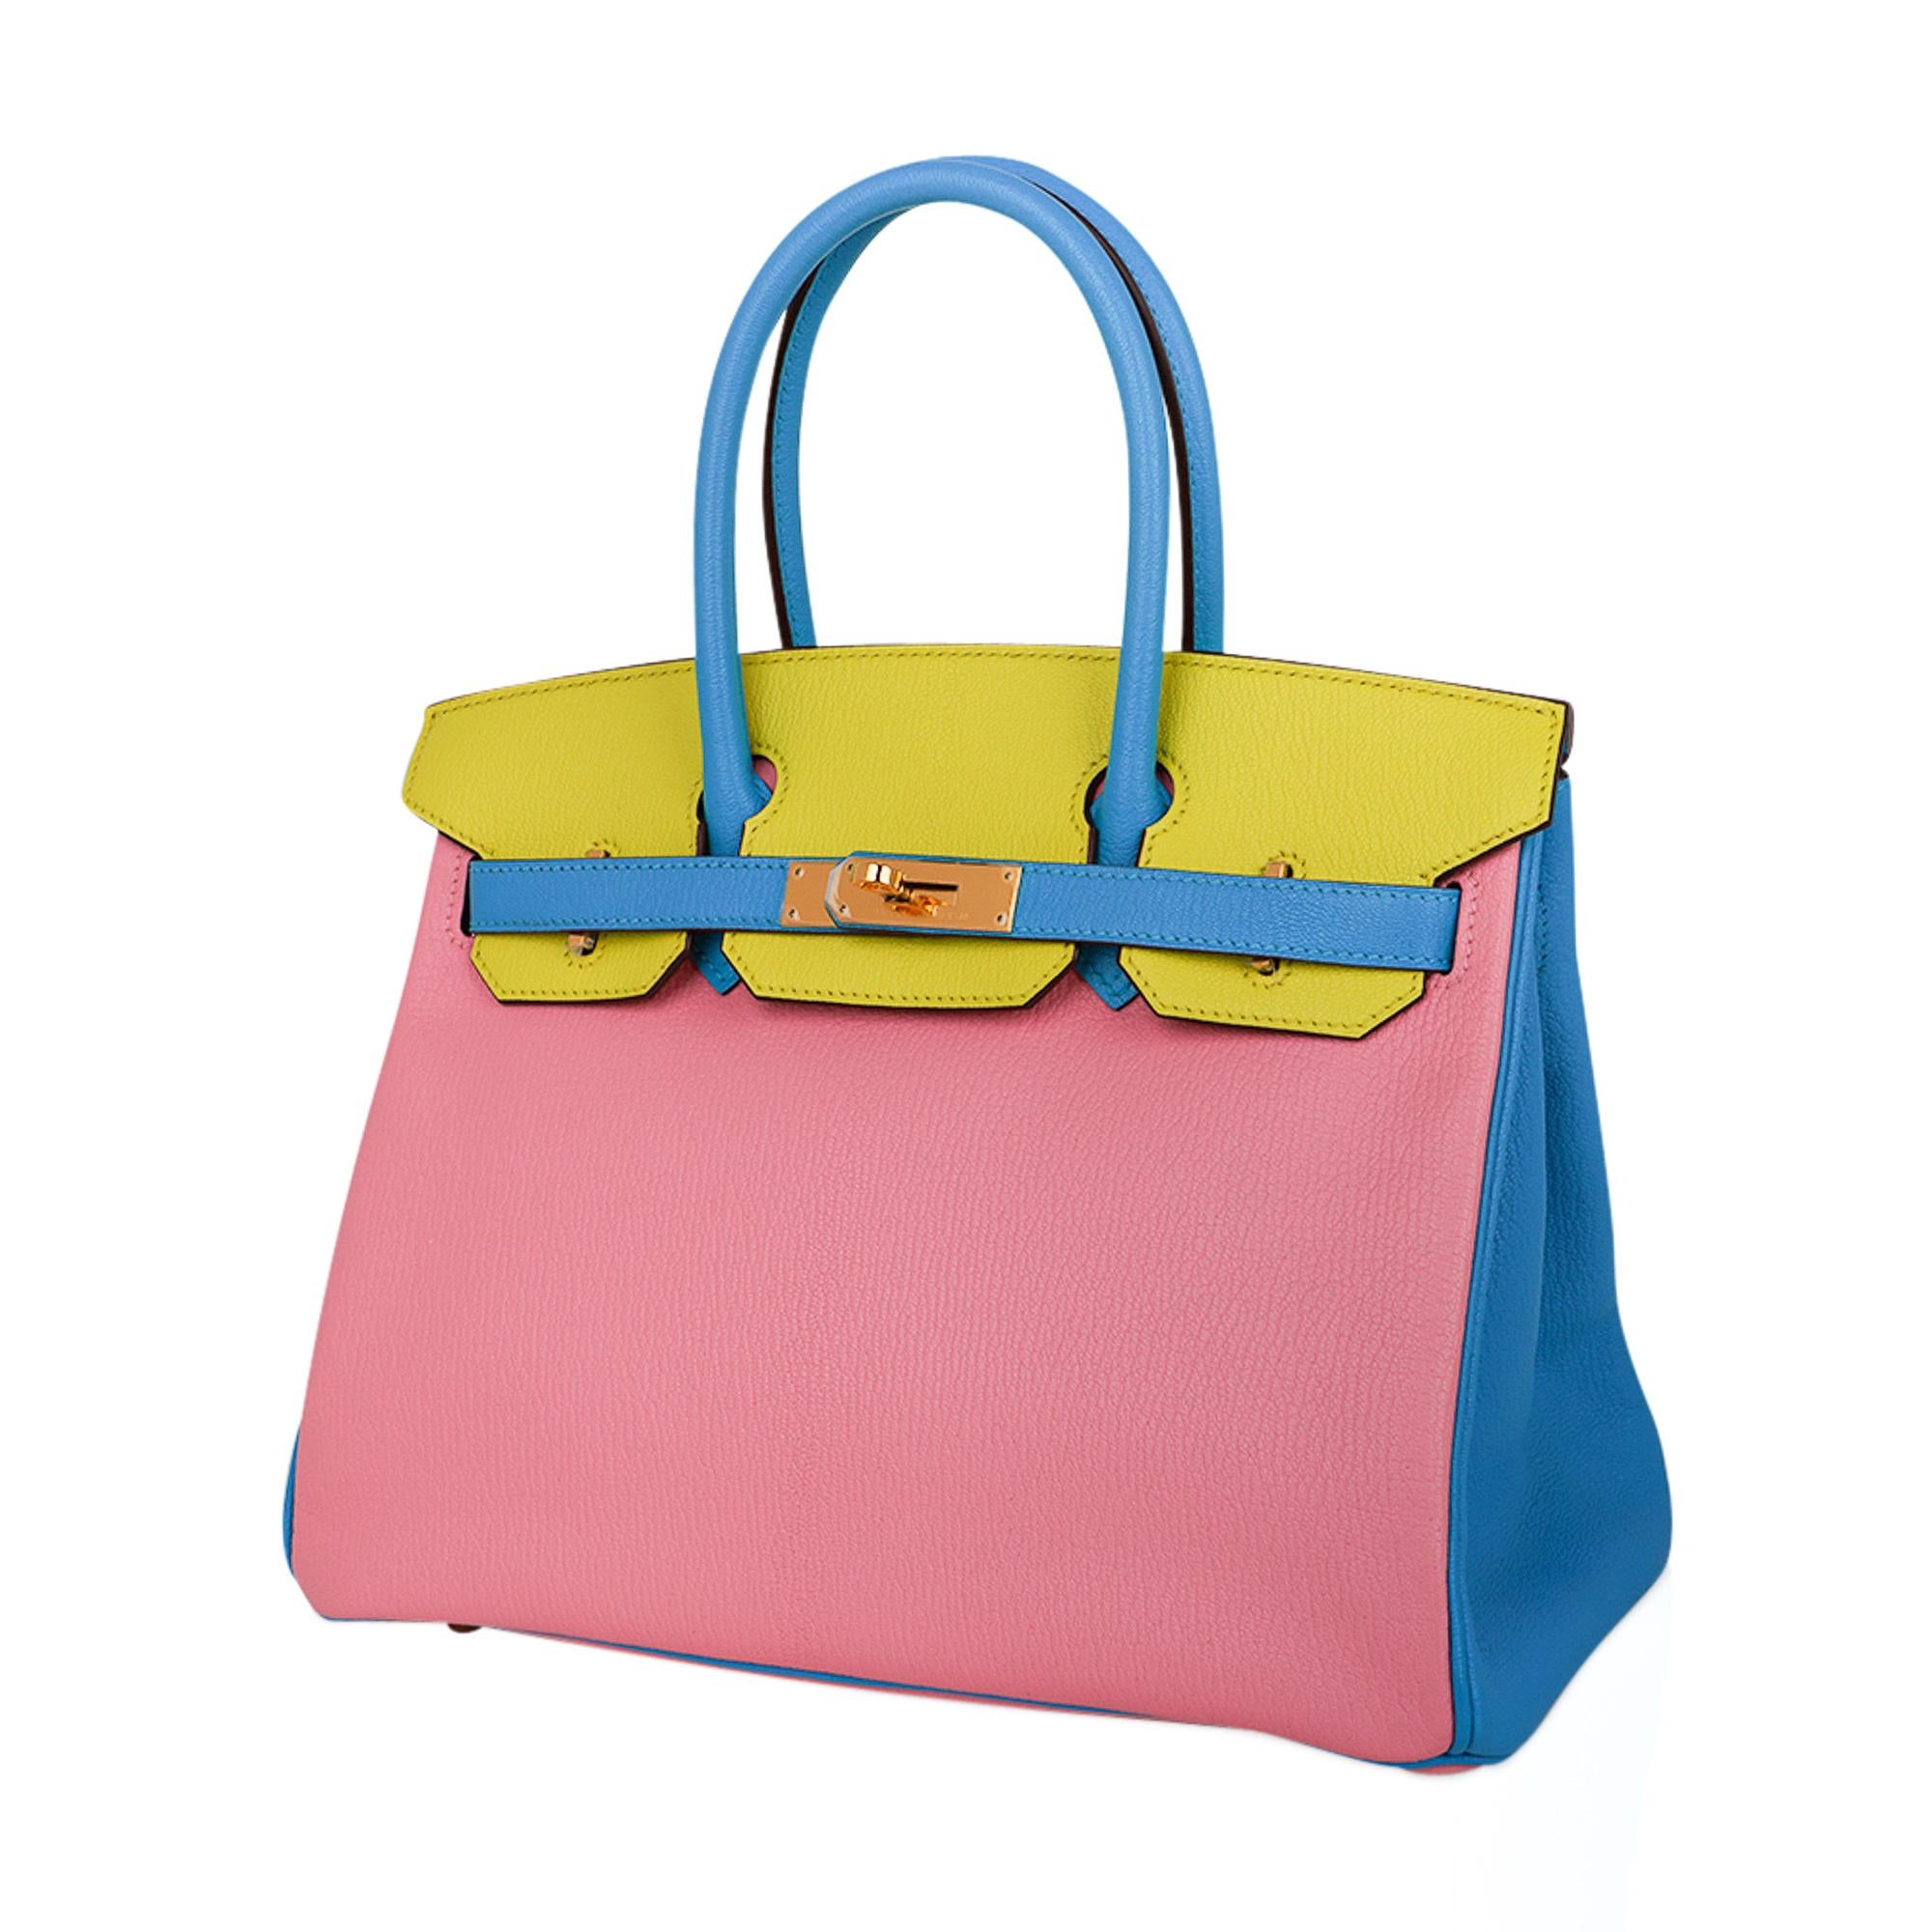 Mightychic offers an tri-color Hermes Birkin HSS 30 featured in Rose Confetti, Blue Aztec and Soufre.
This gorgeous combination is a dream!
Presented in coveted and rare to find Chevre leather.
Lush with gold Birkin bag hardware.
Comes with the lock